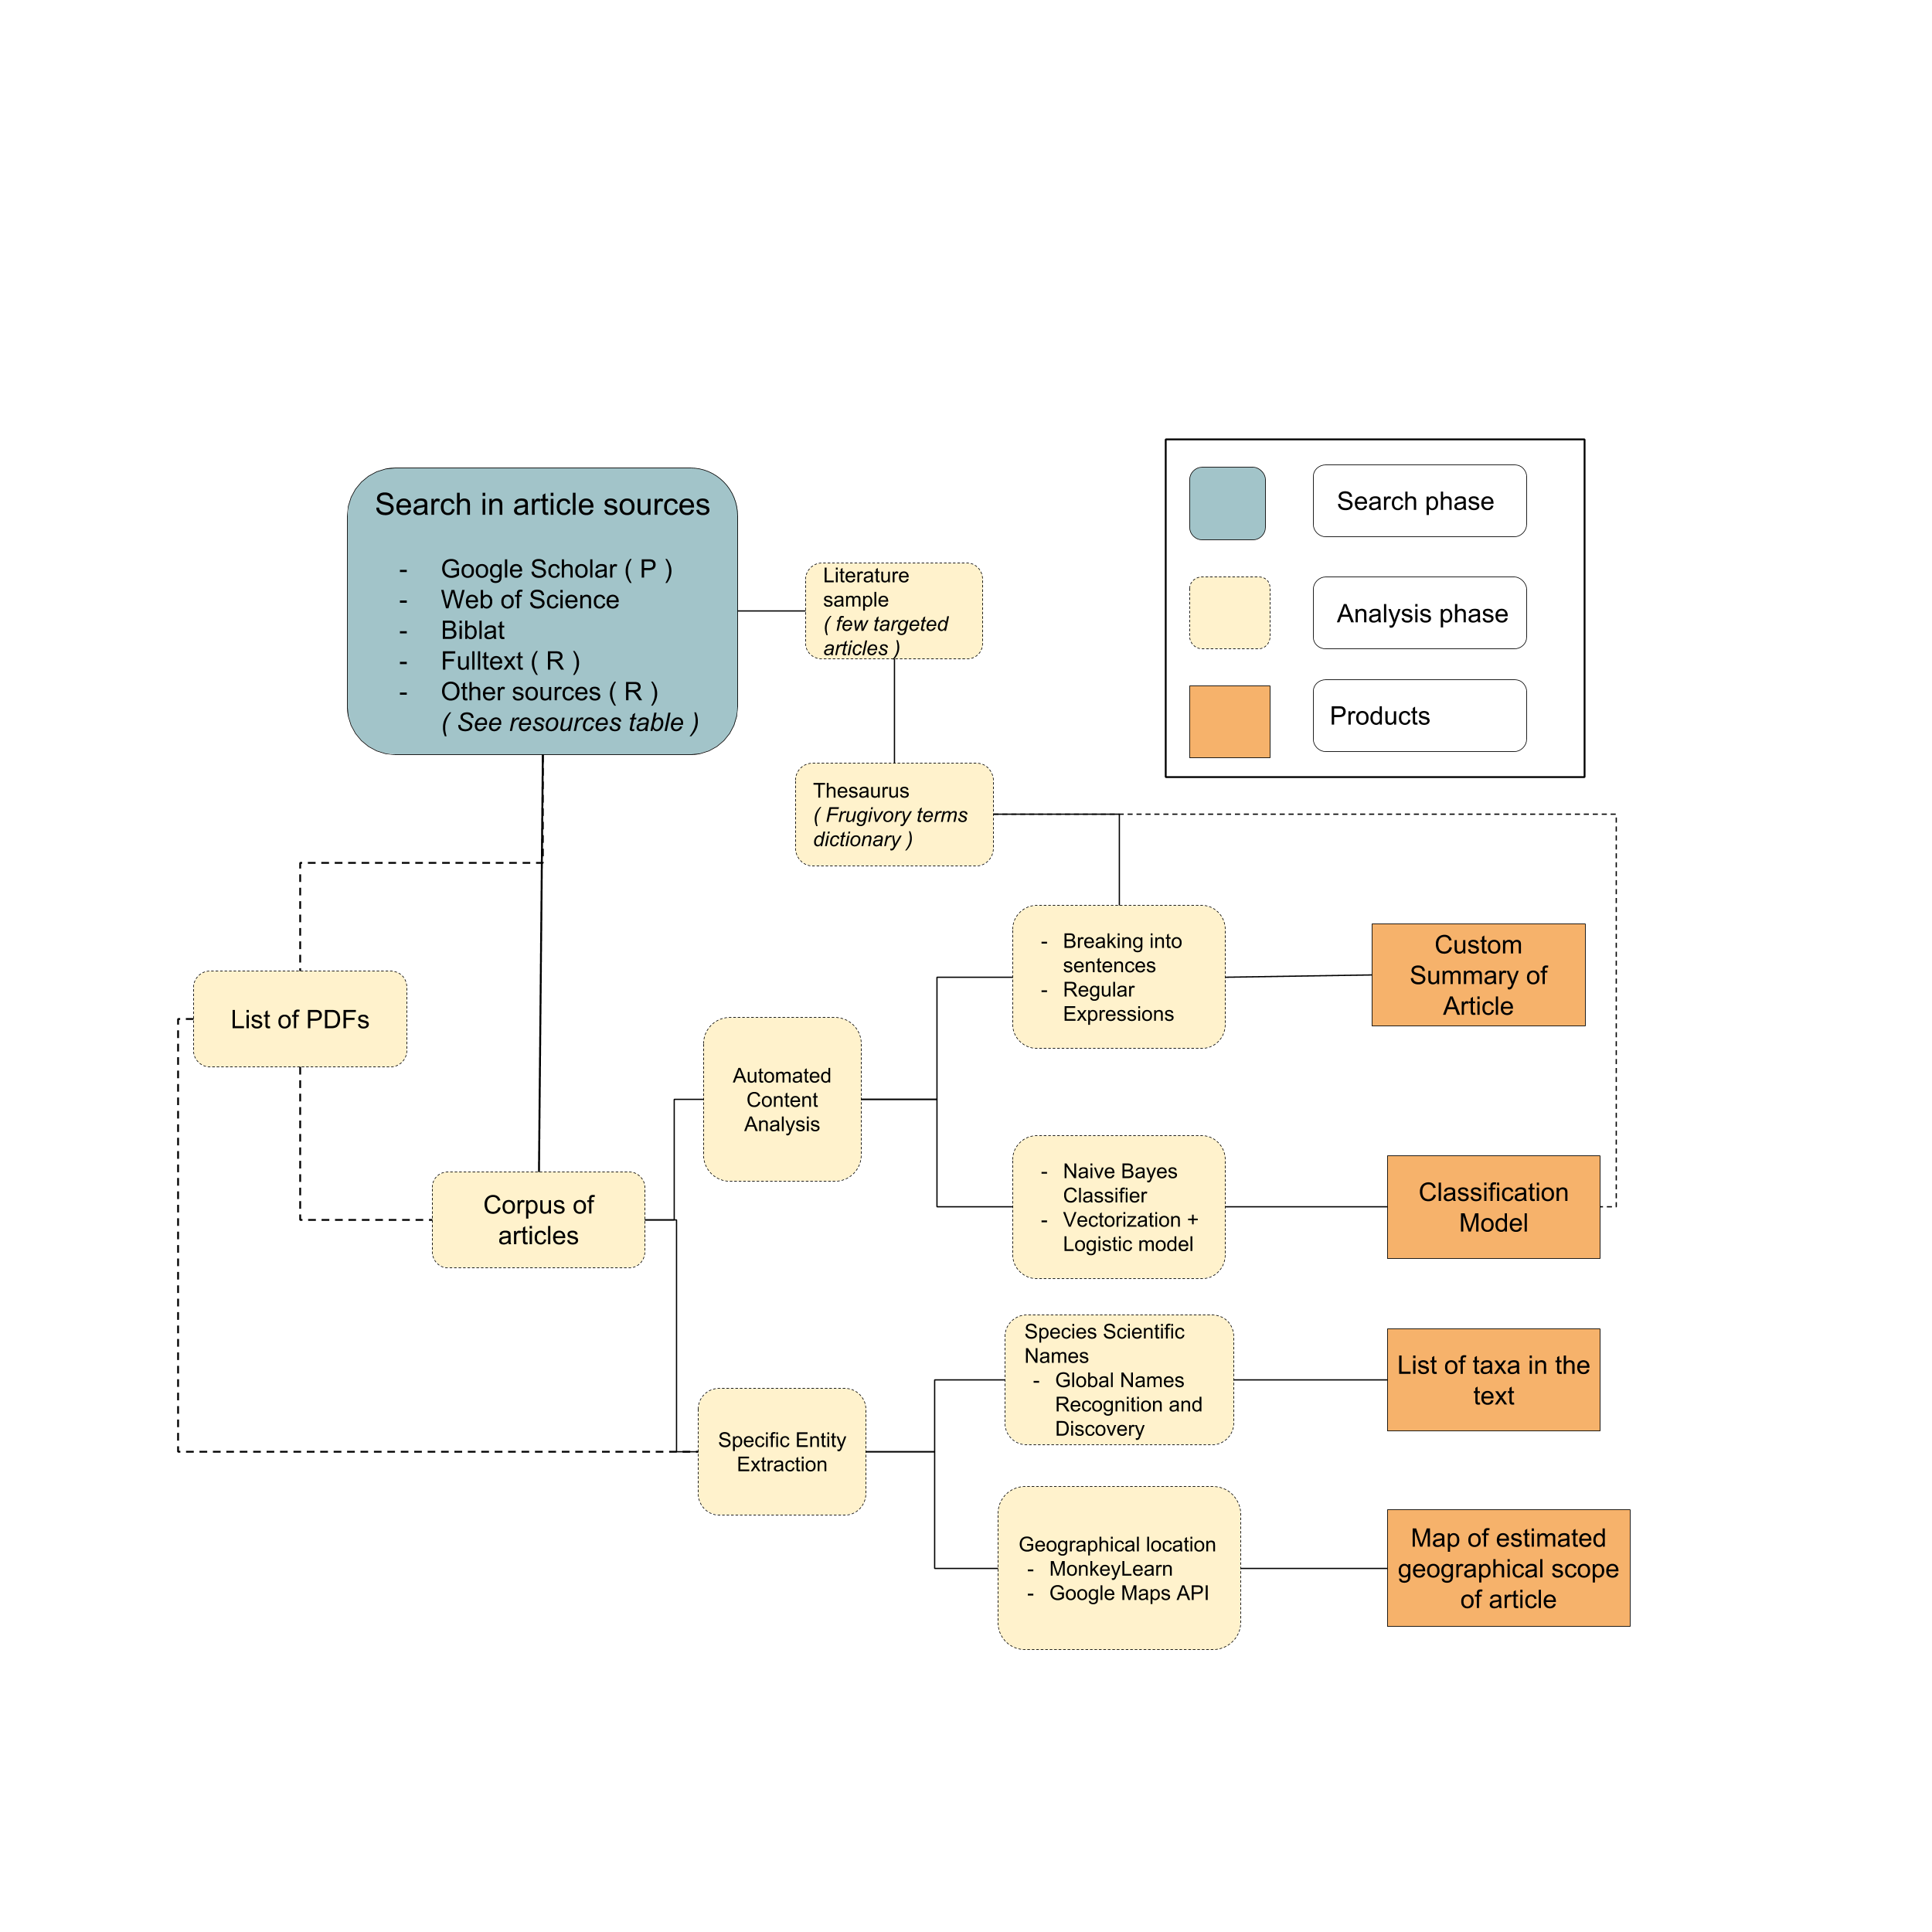 General proposed workflow for the search and classification of literature with species interactions records. Lines represent connections between steps of the workflow. Dashed lines represent optional ways or extra steps that could be avoided. Products can potentially be used together to design more specific workflows tailored to a researcher custom interests